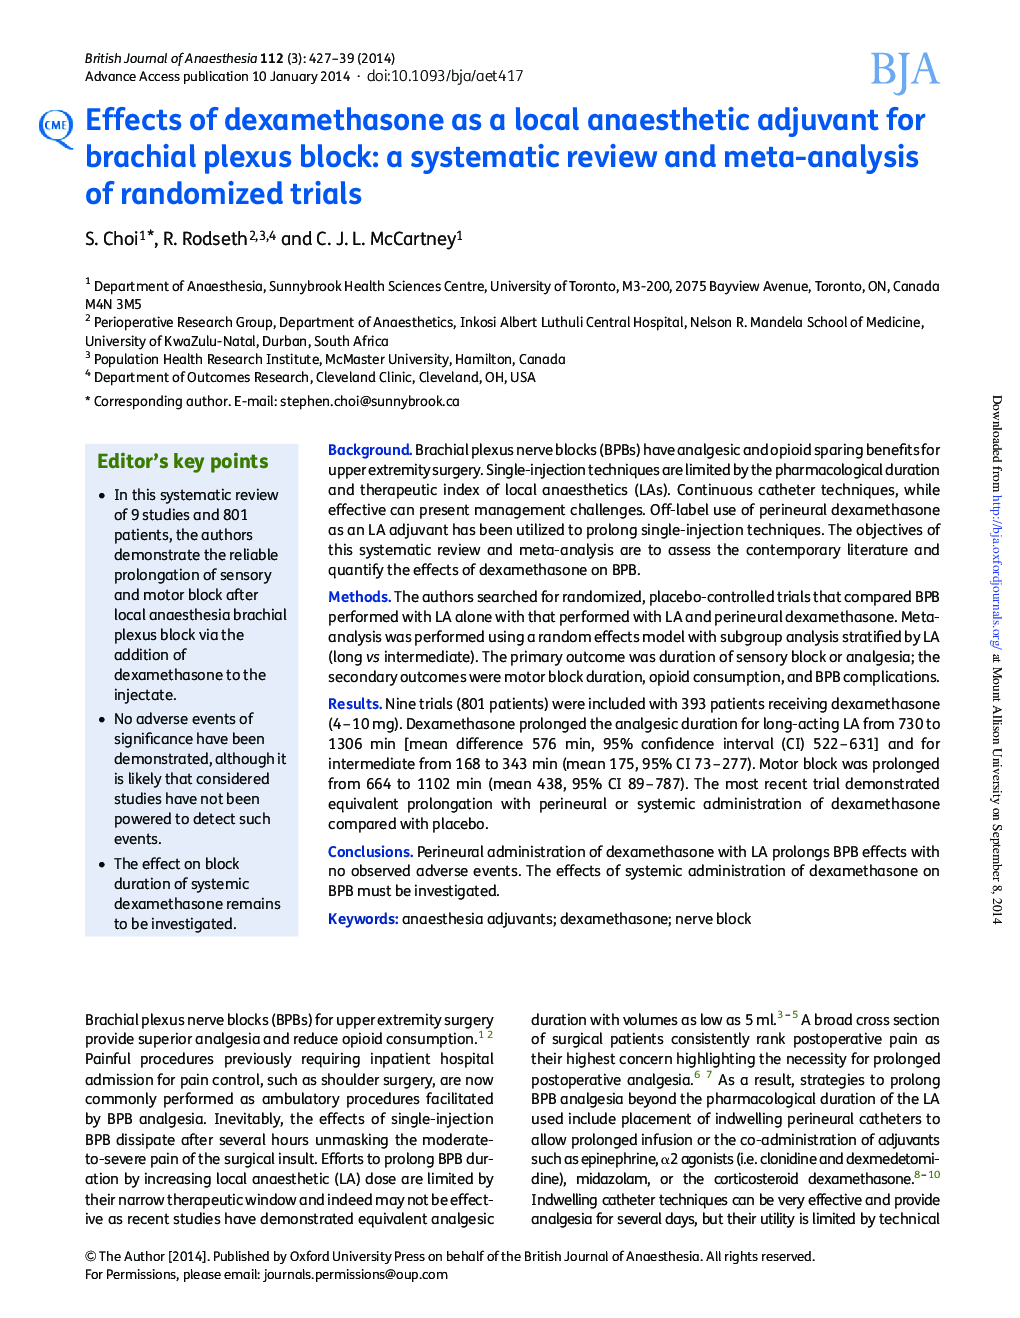 Effects of dexamethasone as a local anaesthetic adjuvant for brachial plexus block: a systematic review and meta-analysis of randomized trials